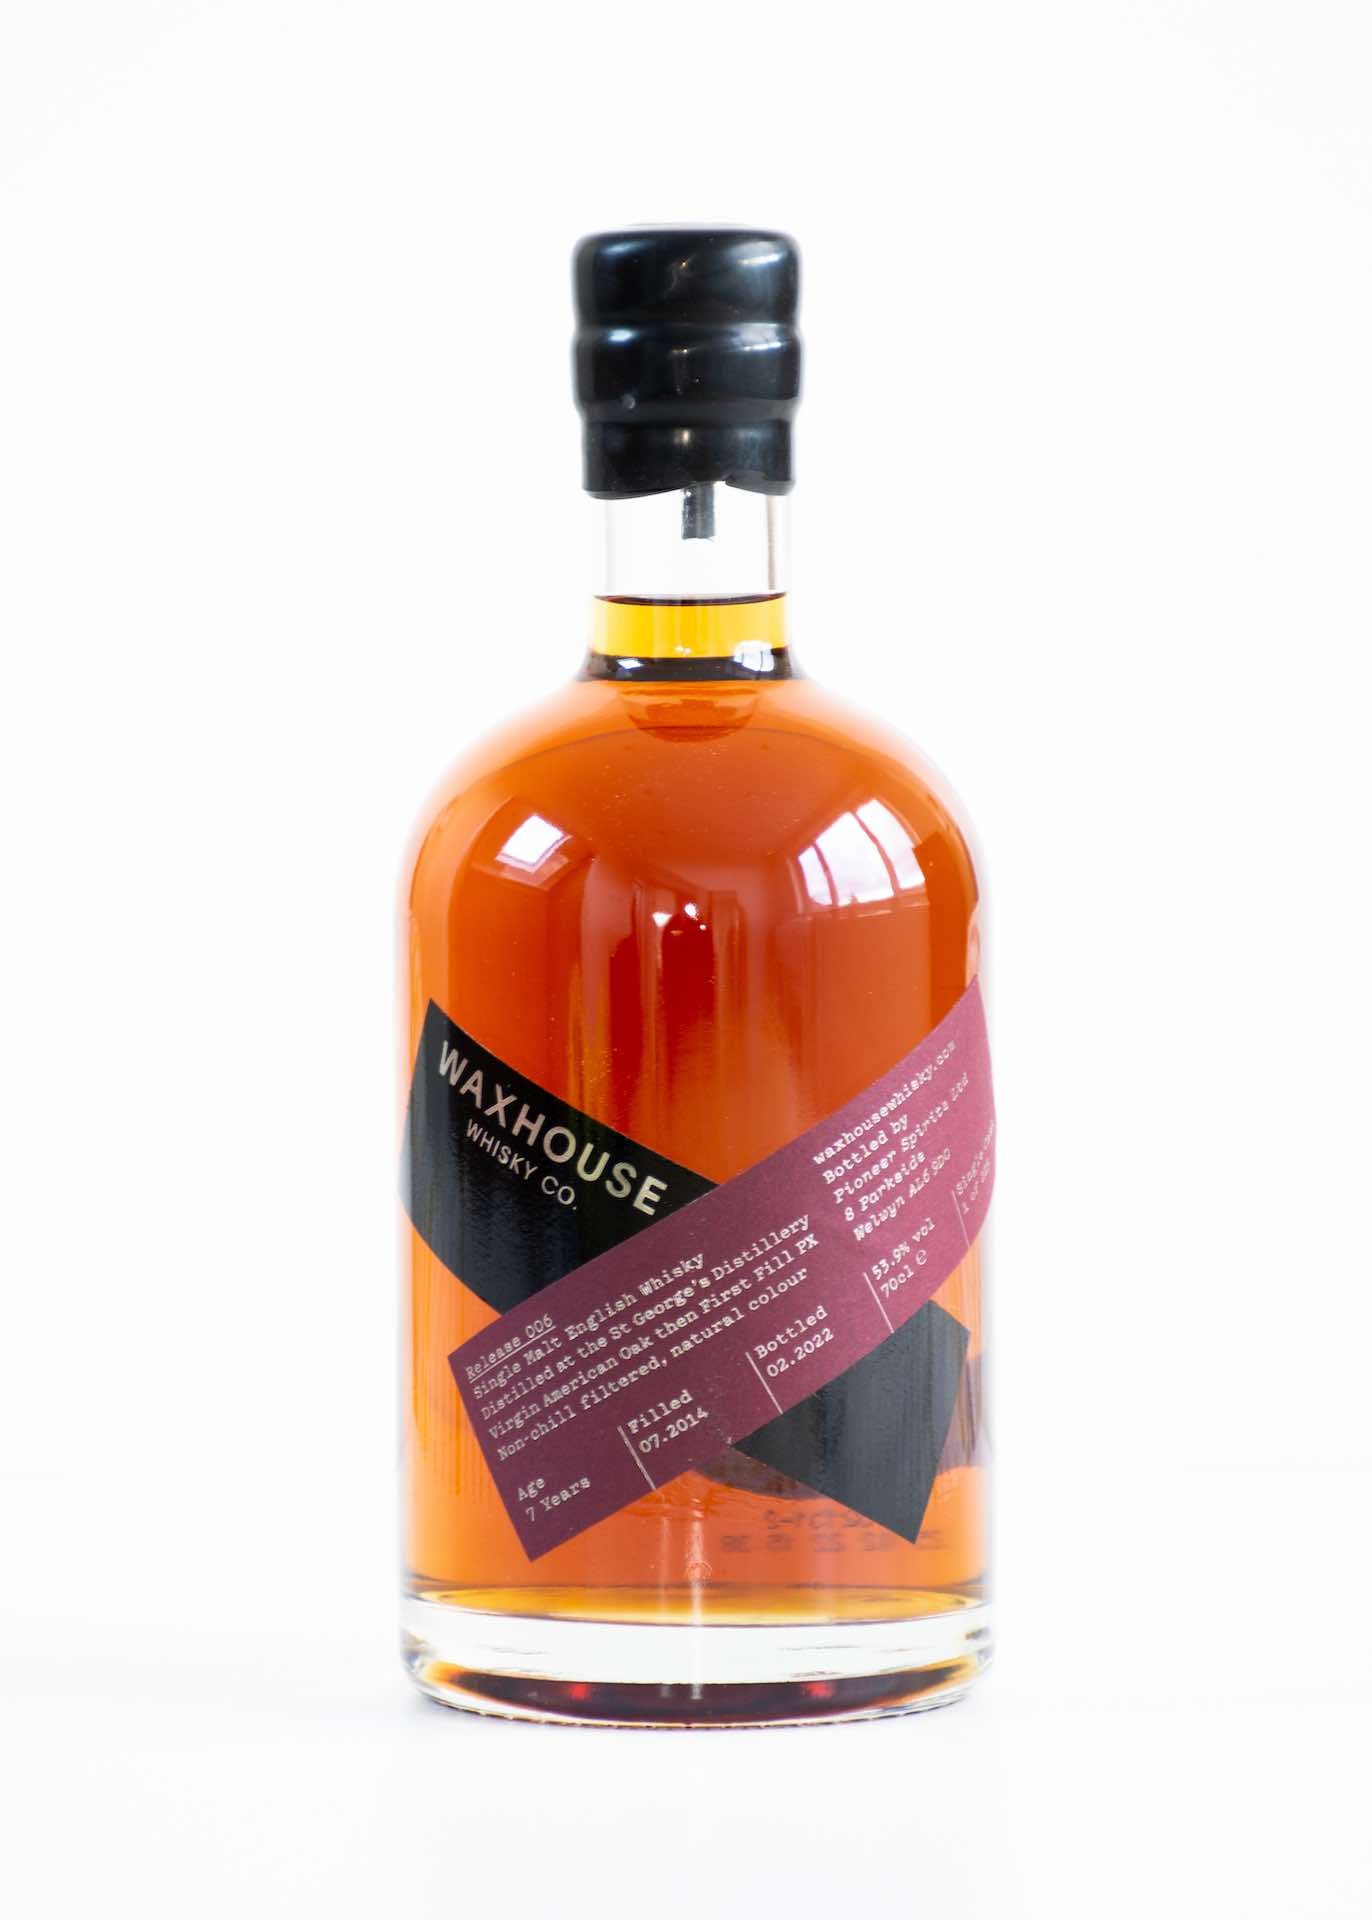 Waxhouse St George's Distillery 7 Year Old PX Cask